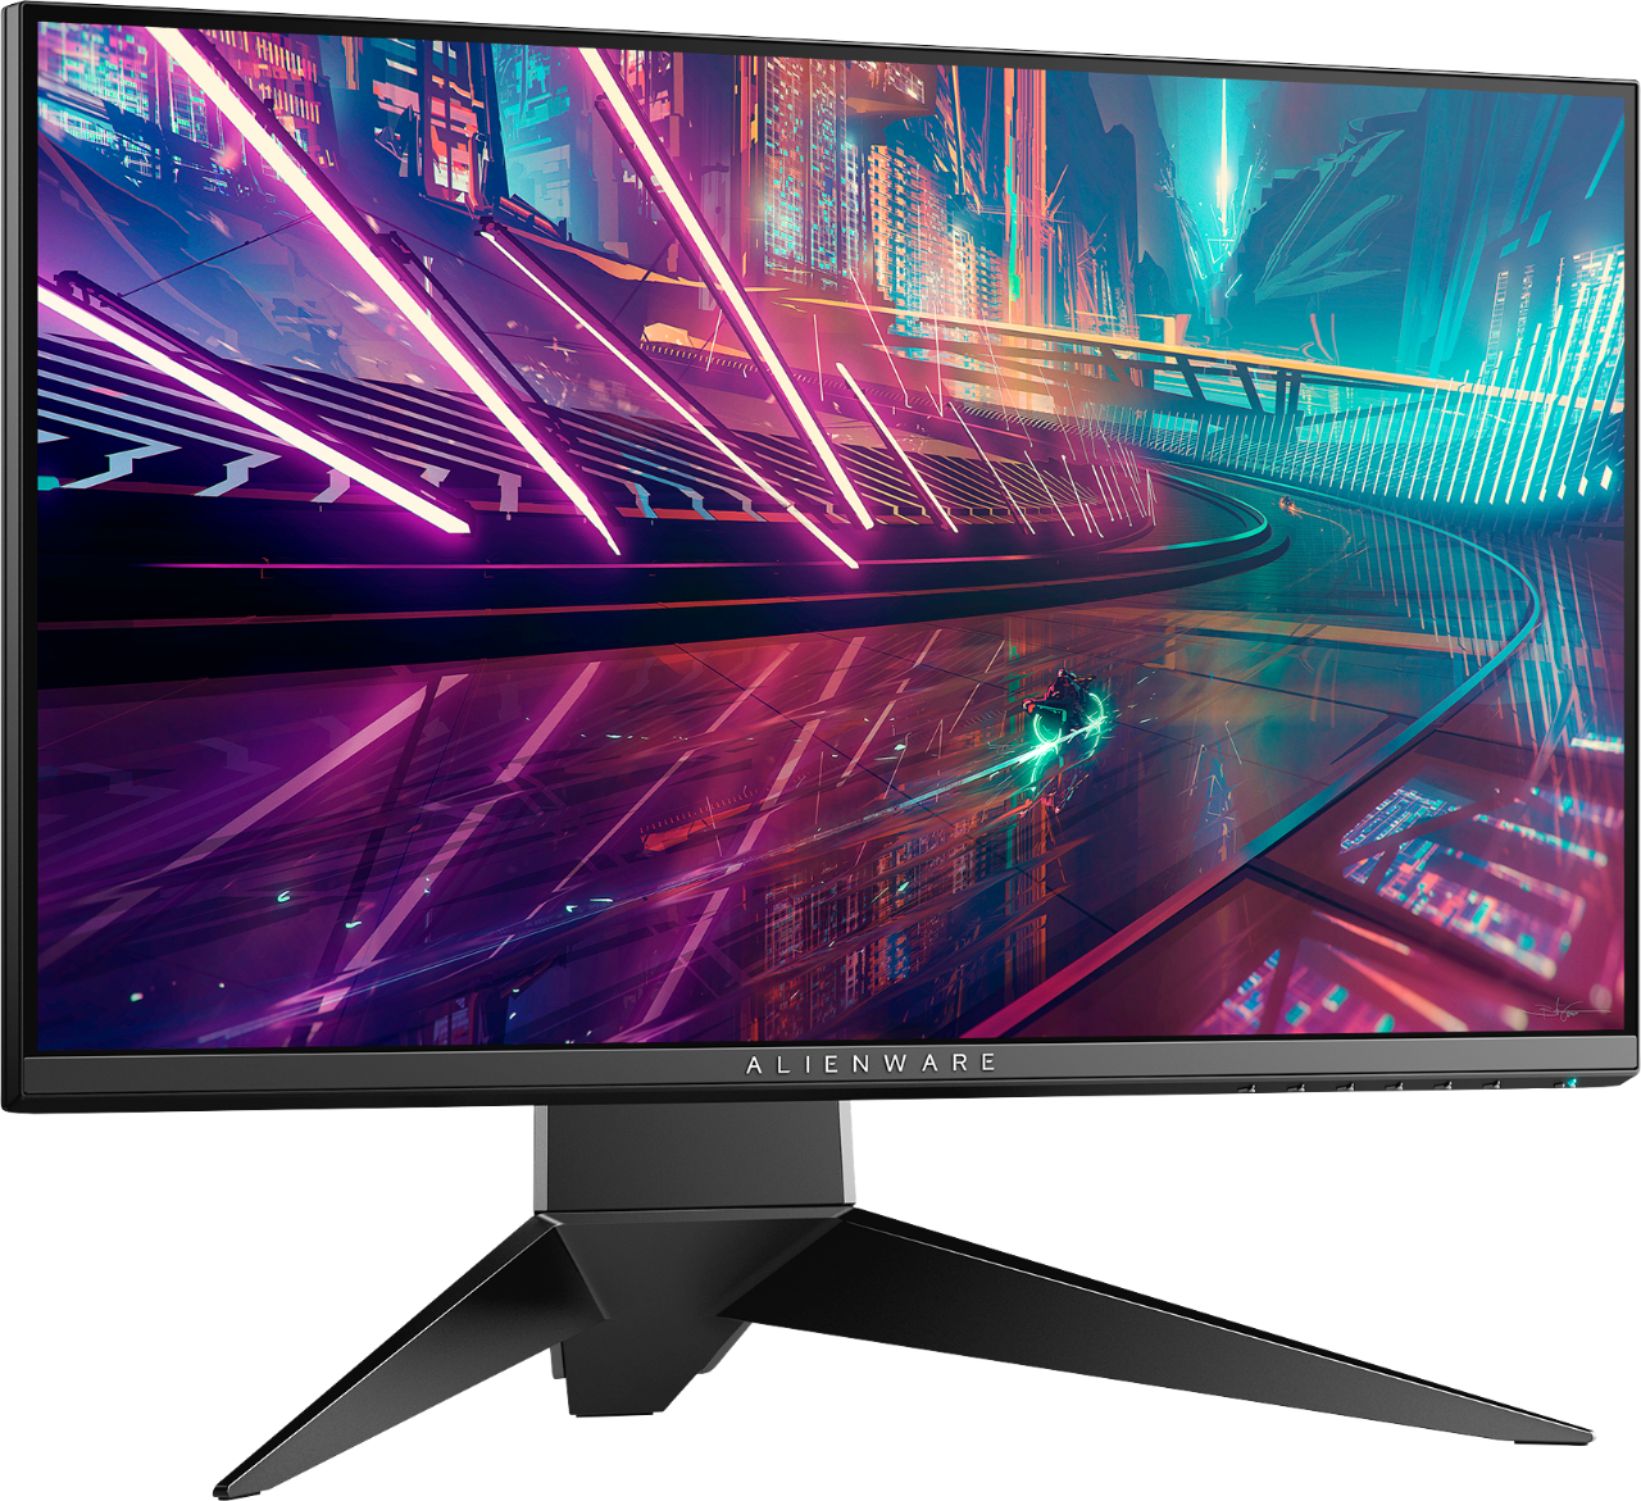 Angle View: Alienware - Geek Squad Certified Refurbished 25" LED FHD G-SYNC Monitor - Black